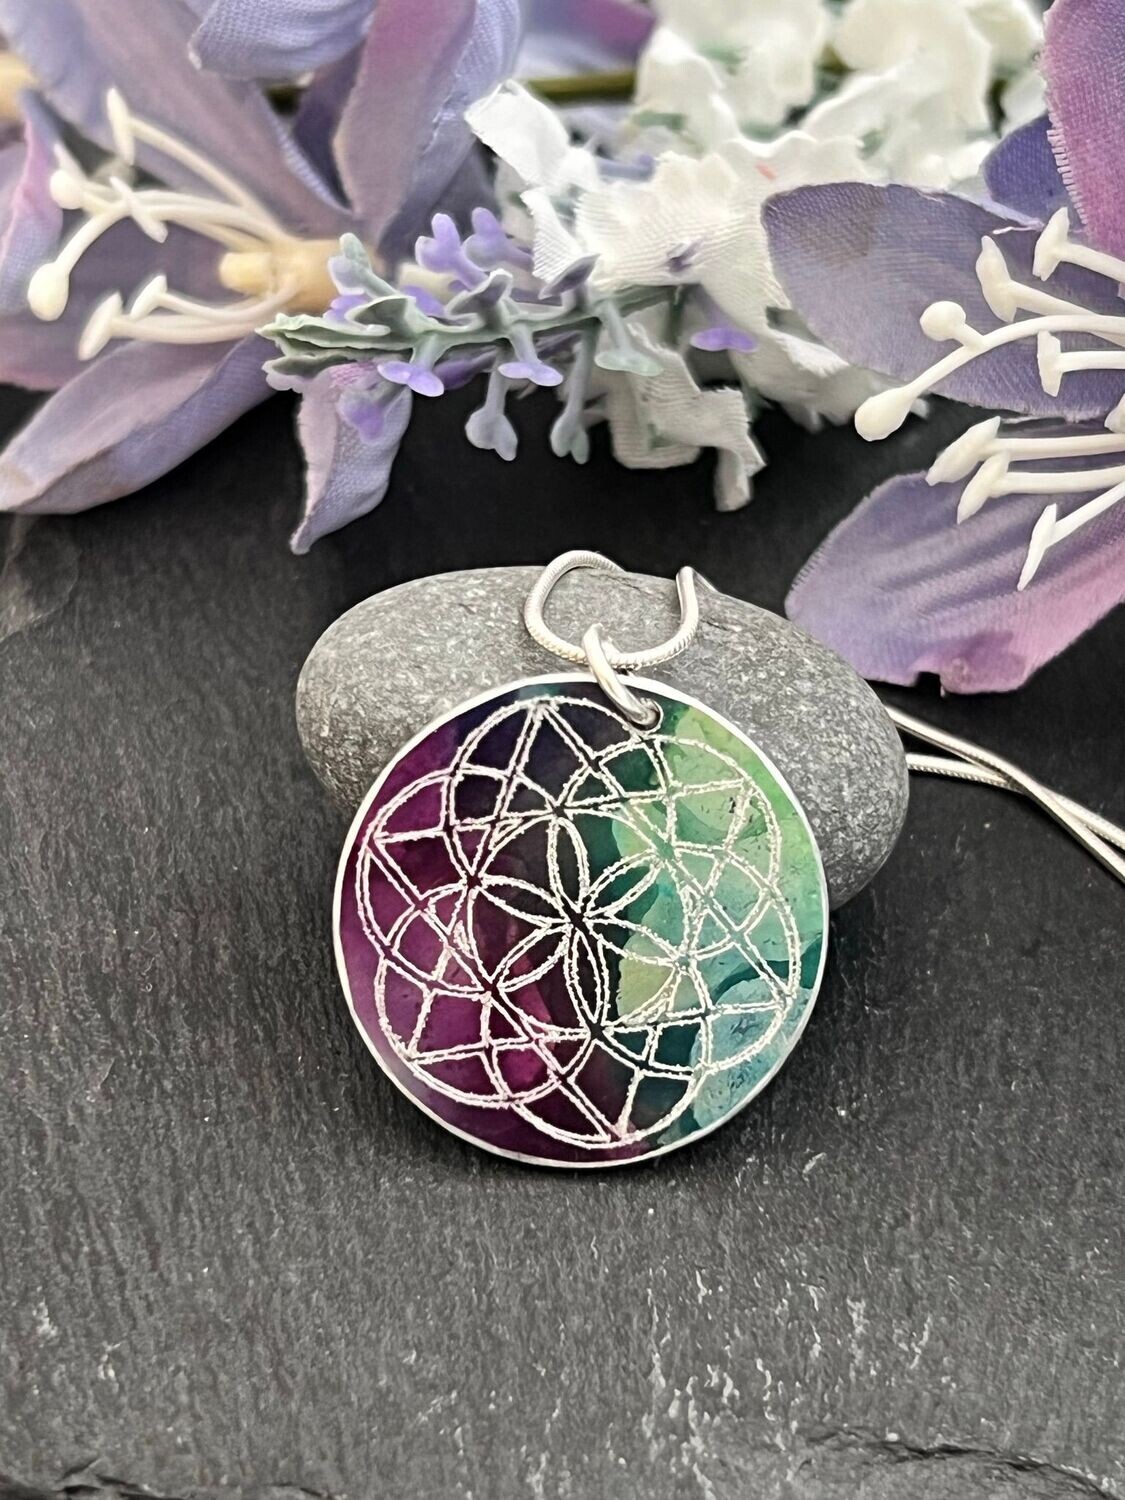 Hand Painted Aluminium Pendant - Green and Purple with engraved sacred geometry symbol